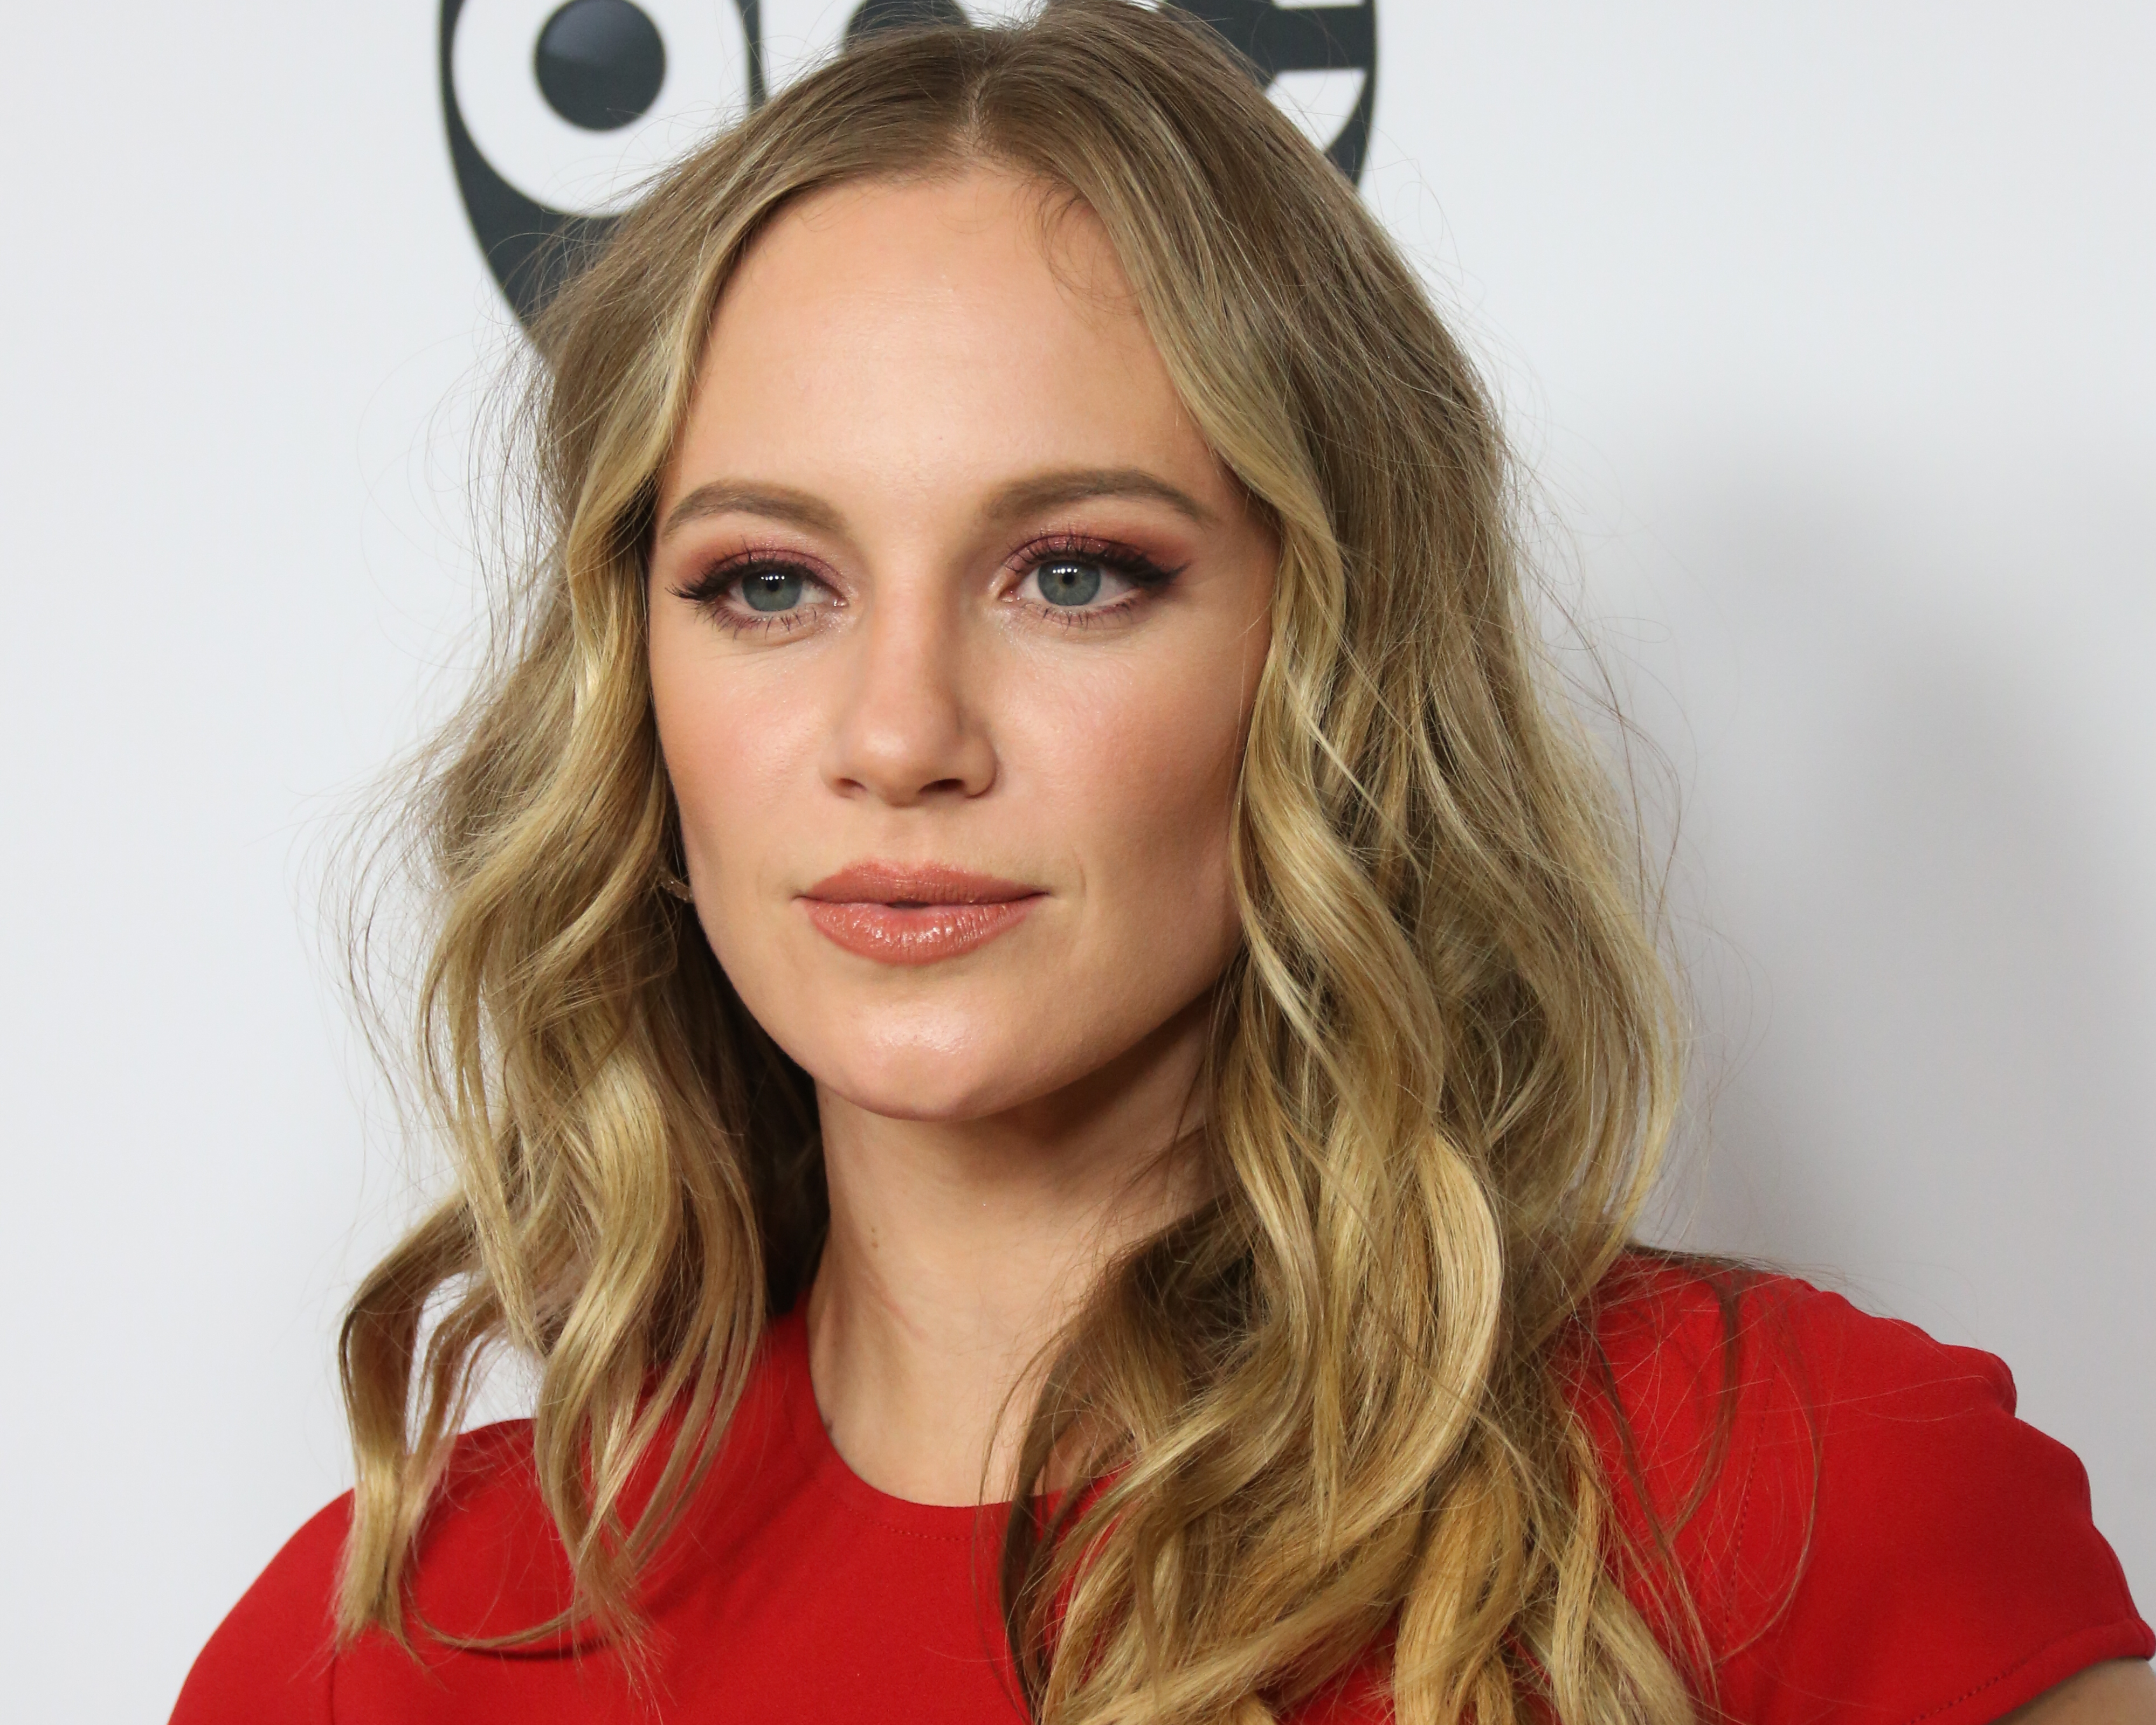 Actress Danielle Savre attends the Disney and ABC Television 2019 TCA Winter press tour at The Langham Huntington Hotel and Spa, on February 5, 2019, in Pasadena, California. | Source: Getty Images